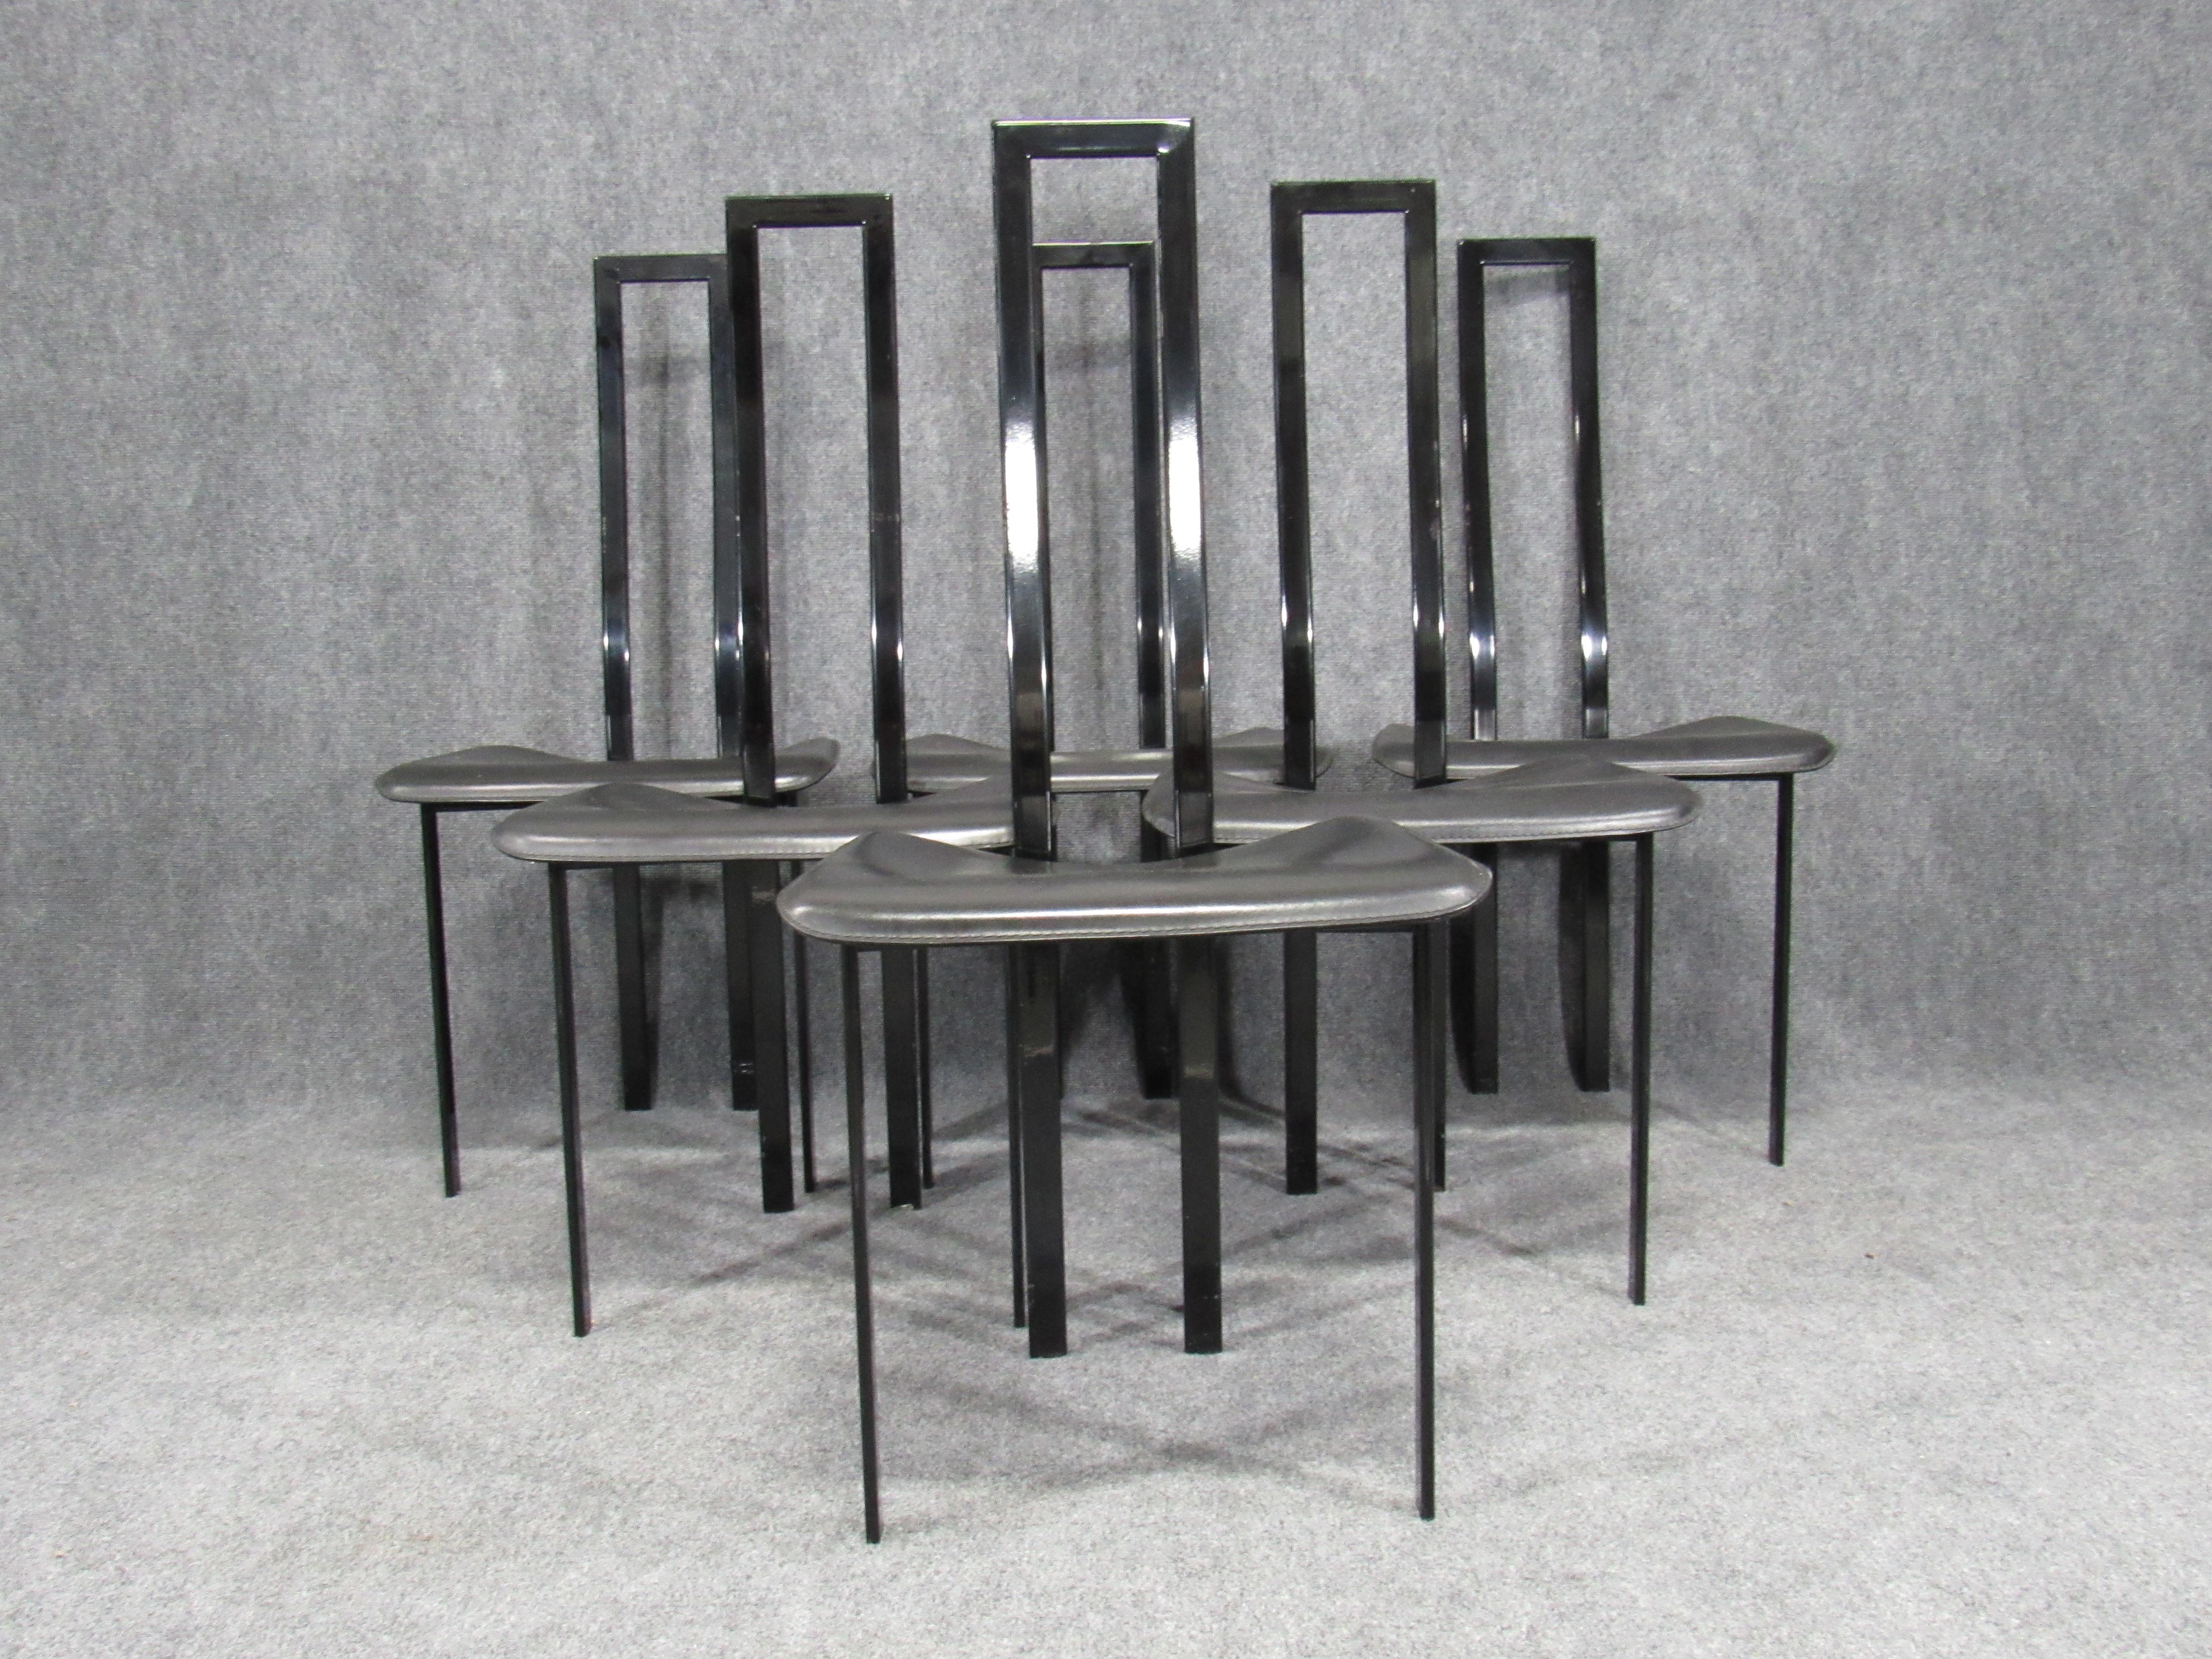 Italian Set of 6 Postmodern Black Metal and Leather Dining Chairs by Cattelan Italia